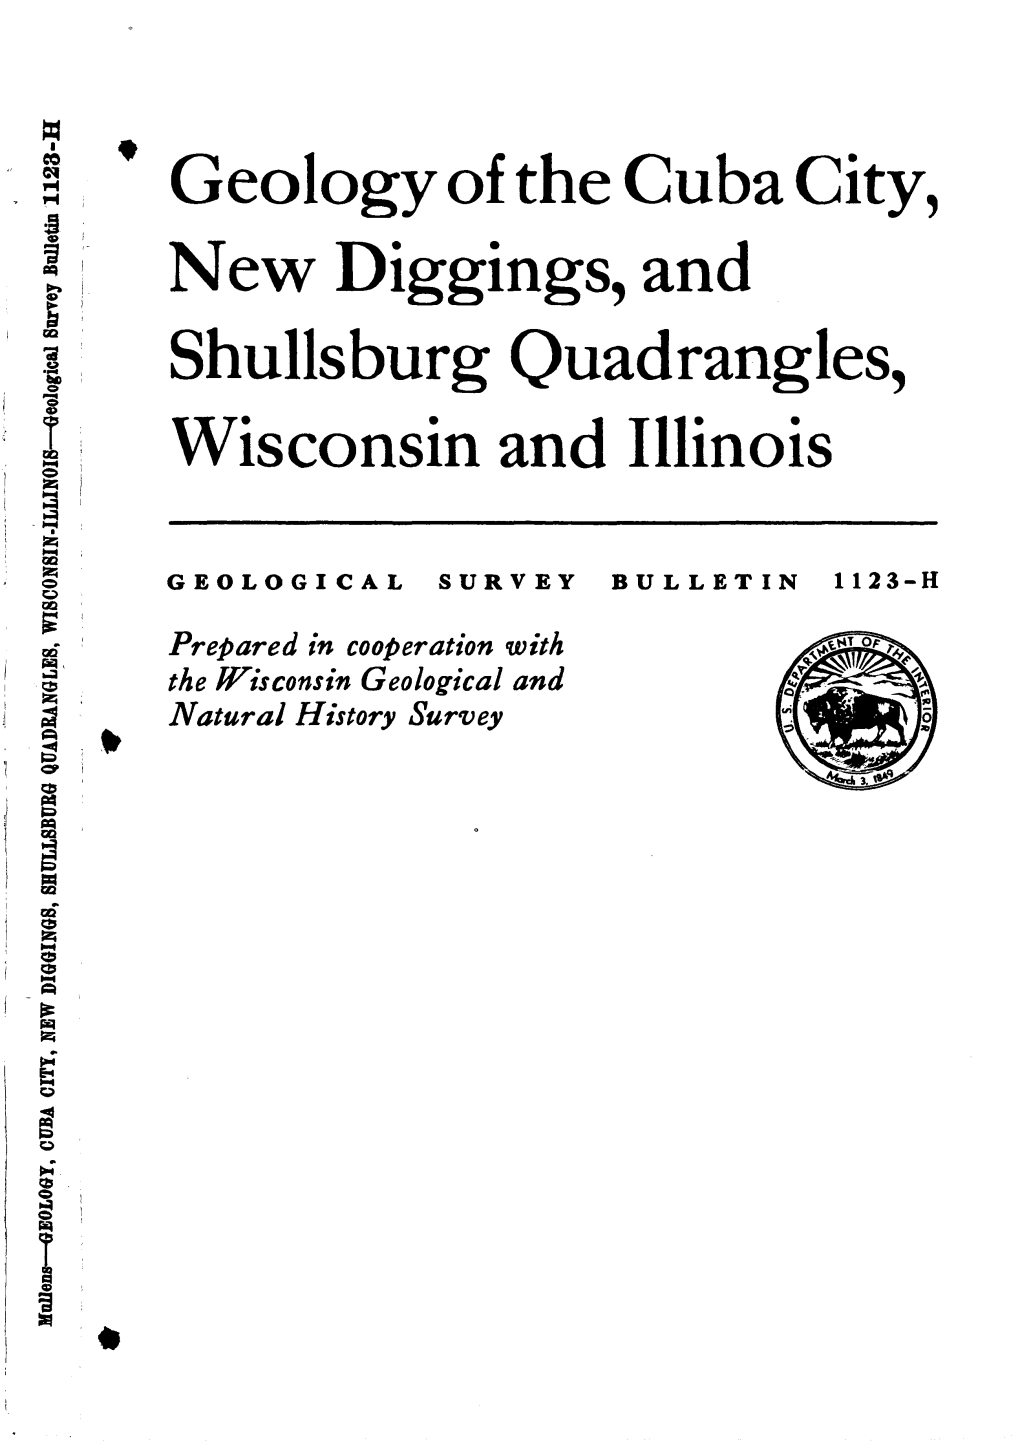 Geology of the Cuba City, New Diggings, and Shullsburg Quadrangles, Wisconsin and Illinois